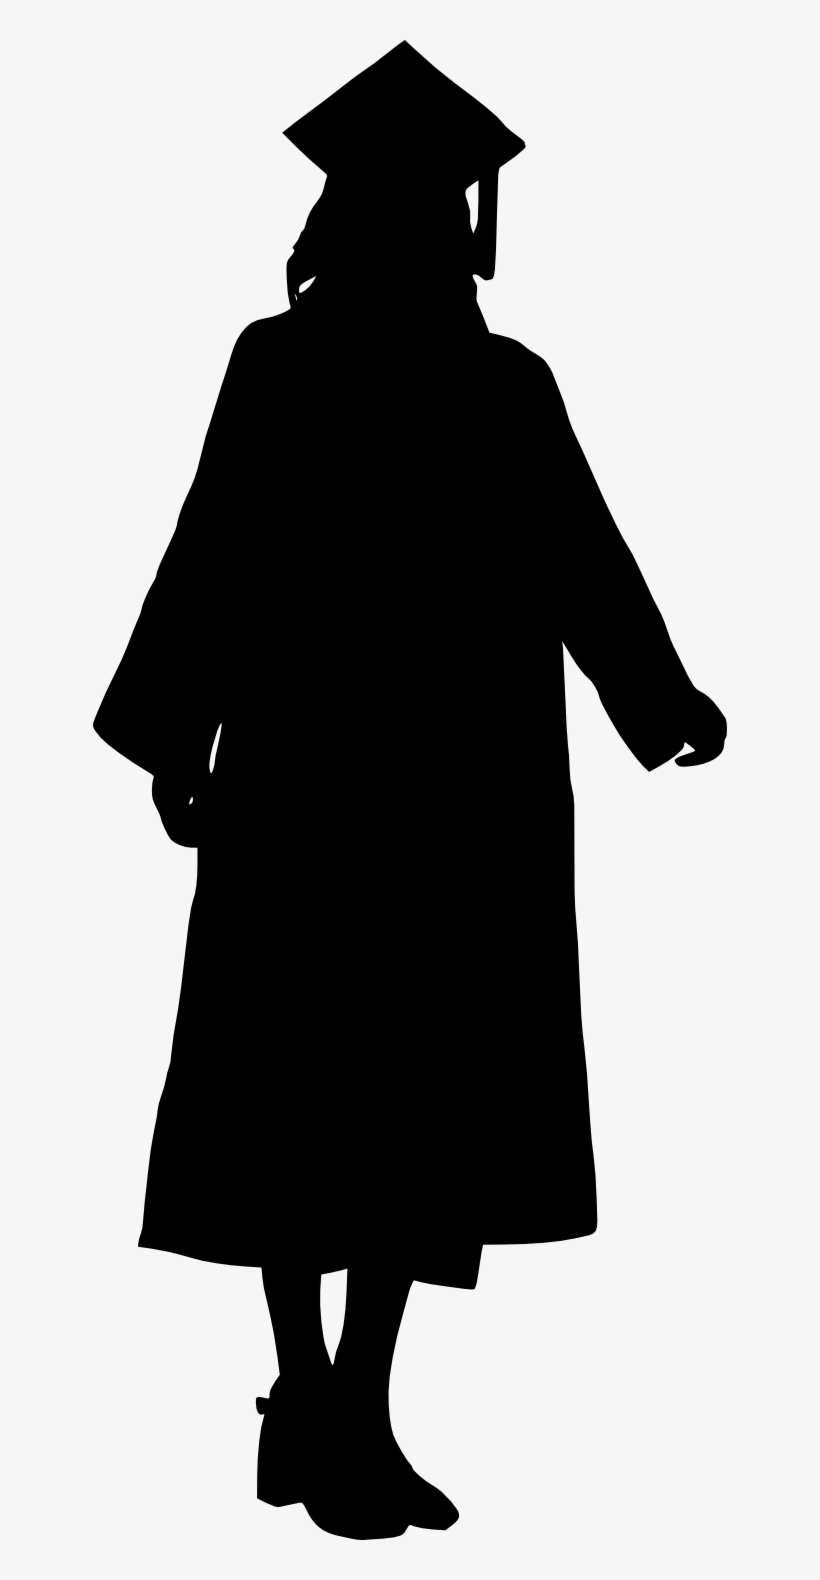 Png File Size - Silhouette Of A Man Walking Away, transparent png #125143